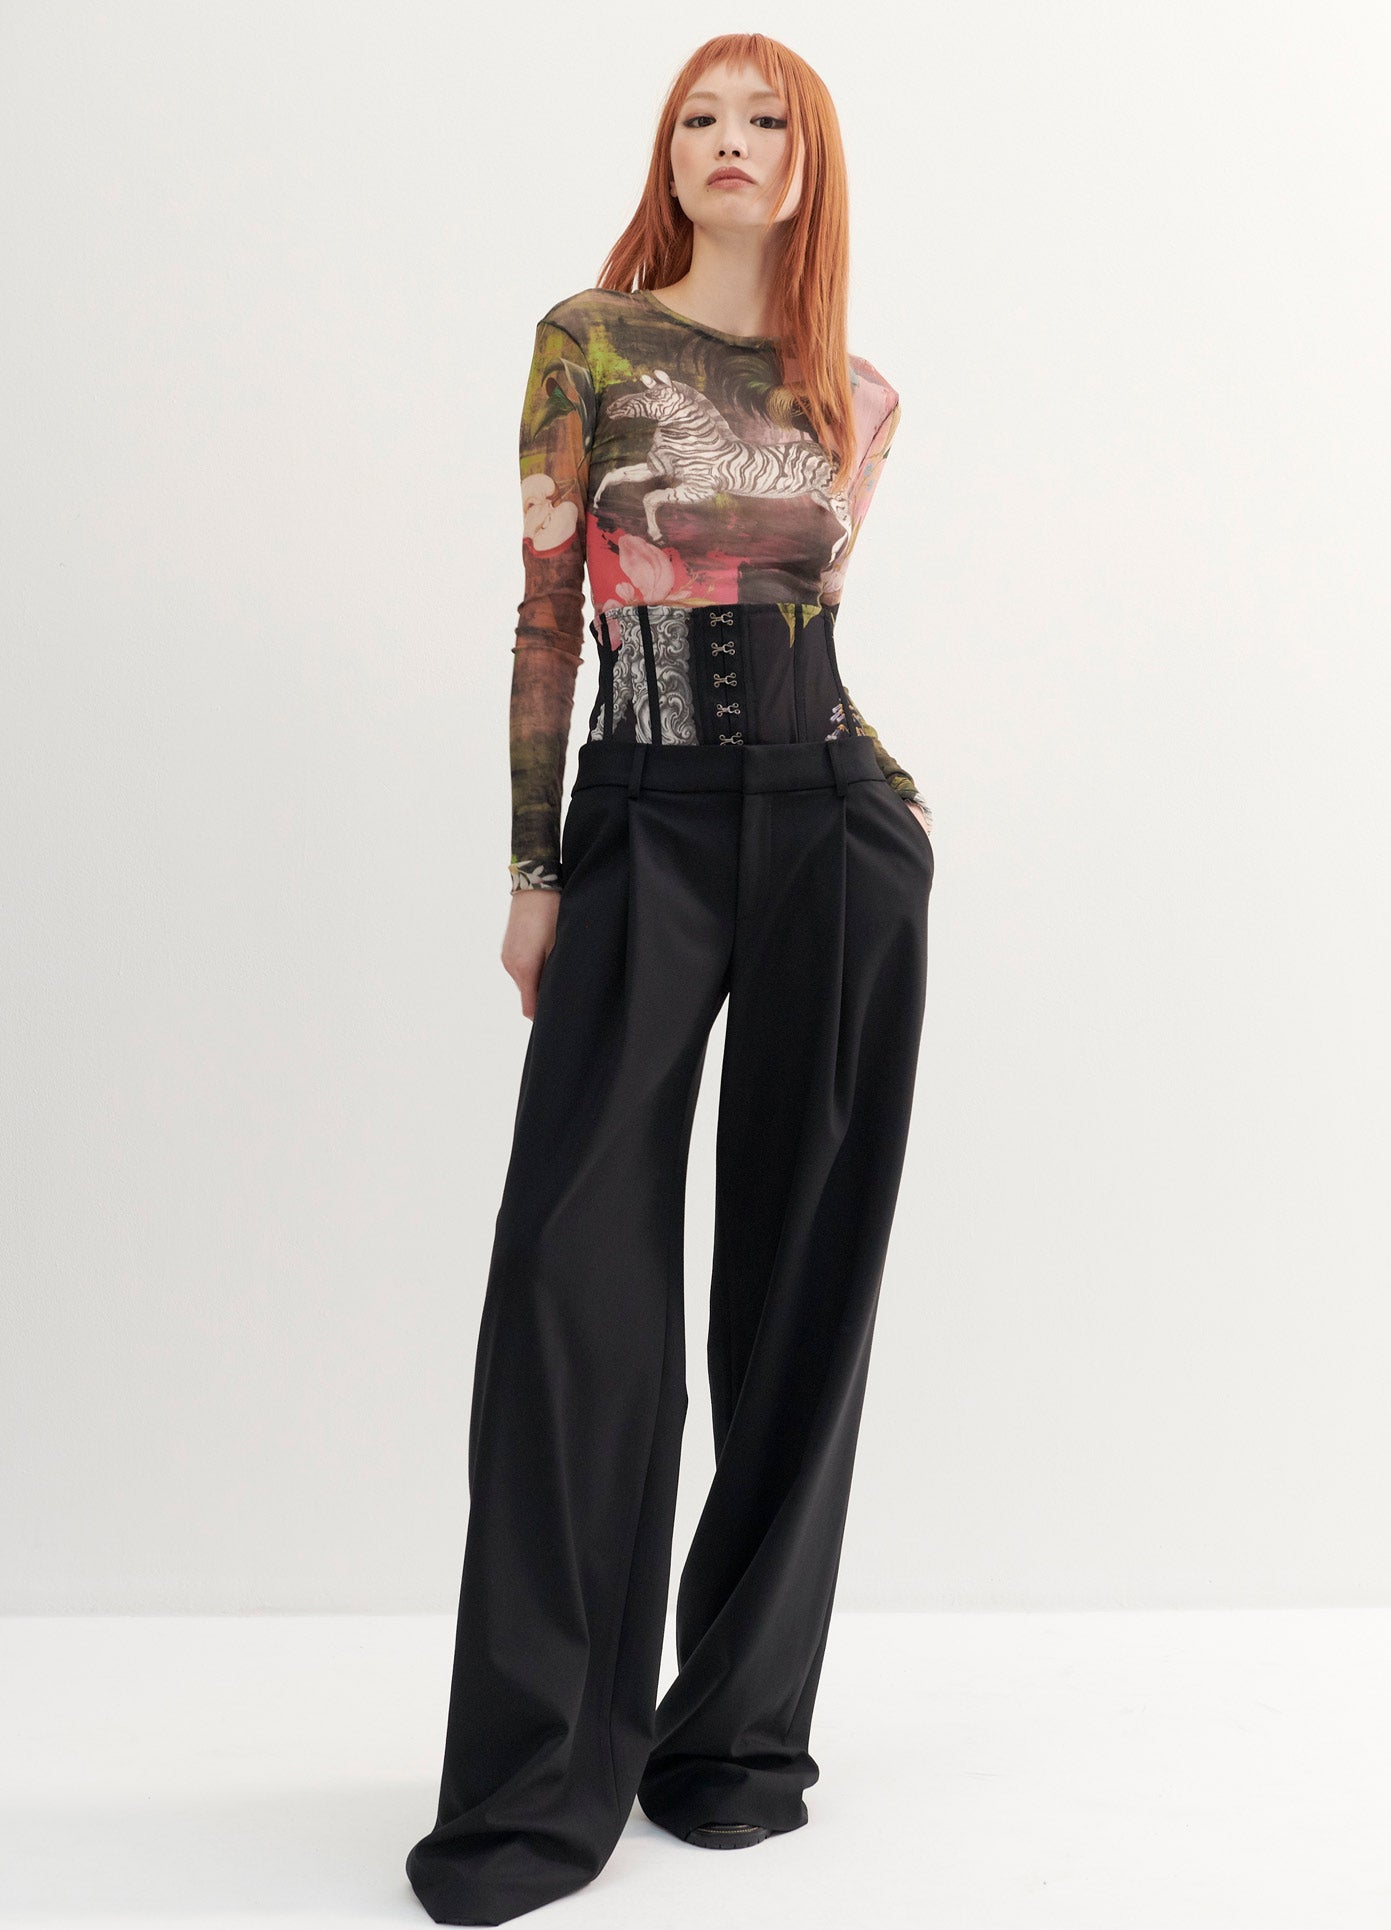 MONSE Print Bustier Trousers in Black on Model Full Front View